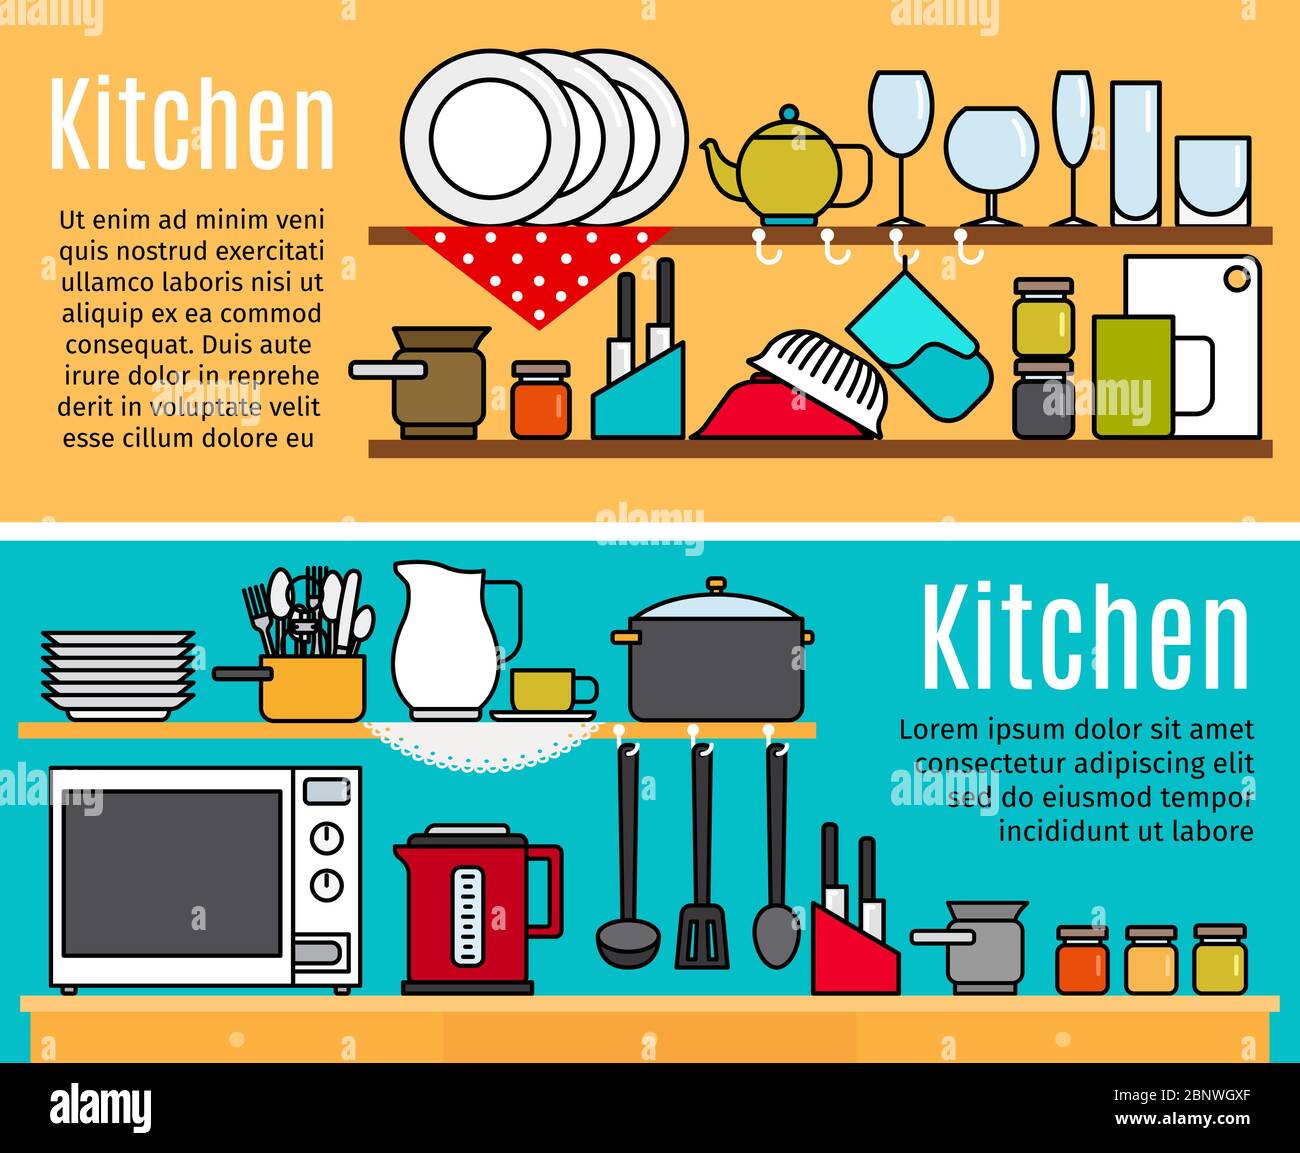 Horizontal kitchen banners templates with text. Vector illustration Stock Vector